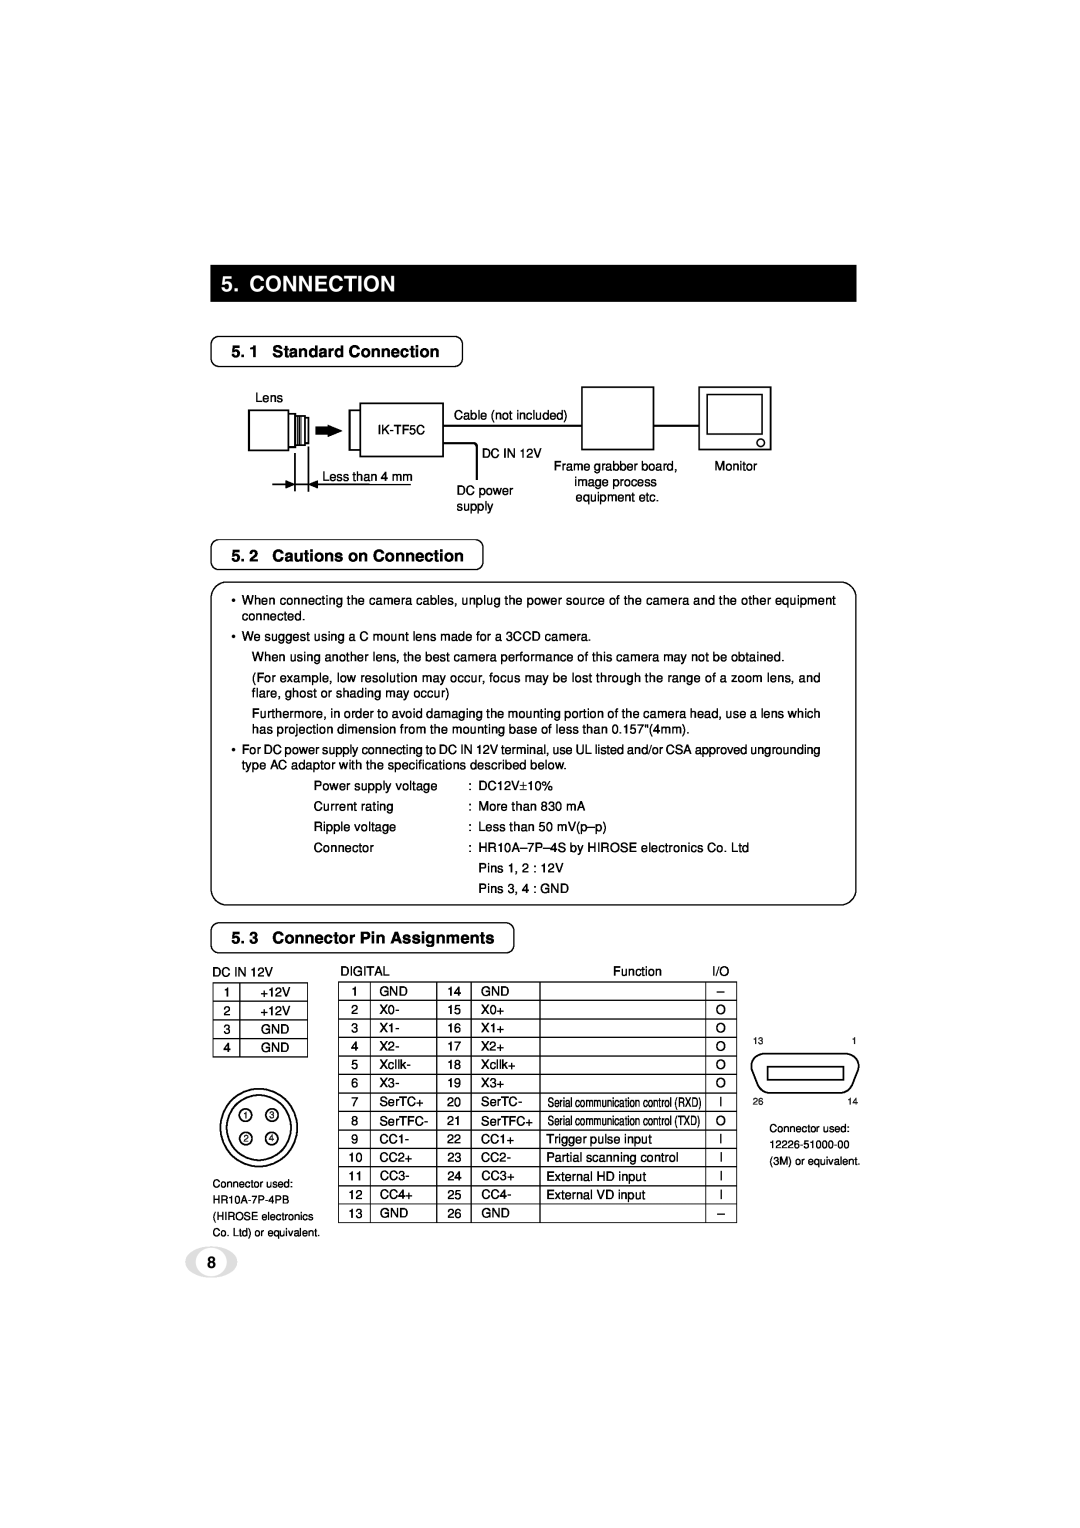 Toshiba IK-TF5C 5. 1 Standard Connection, 5. 2 Cautions on Connection, 5. 3 Connector Pin Assignments 